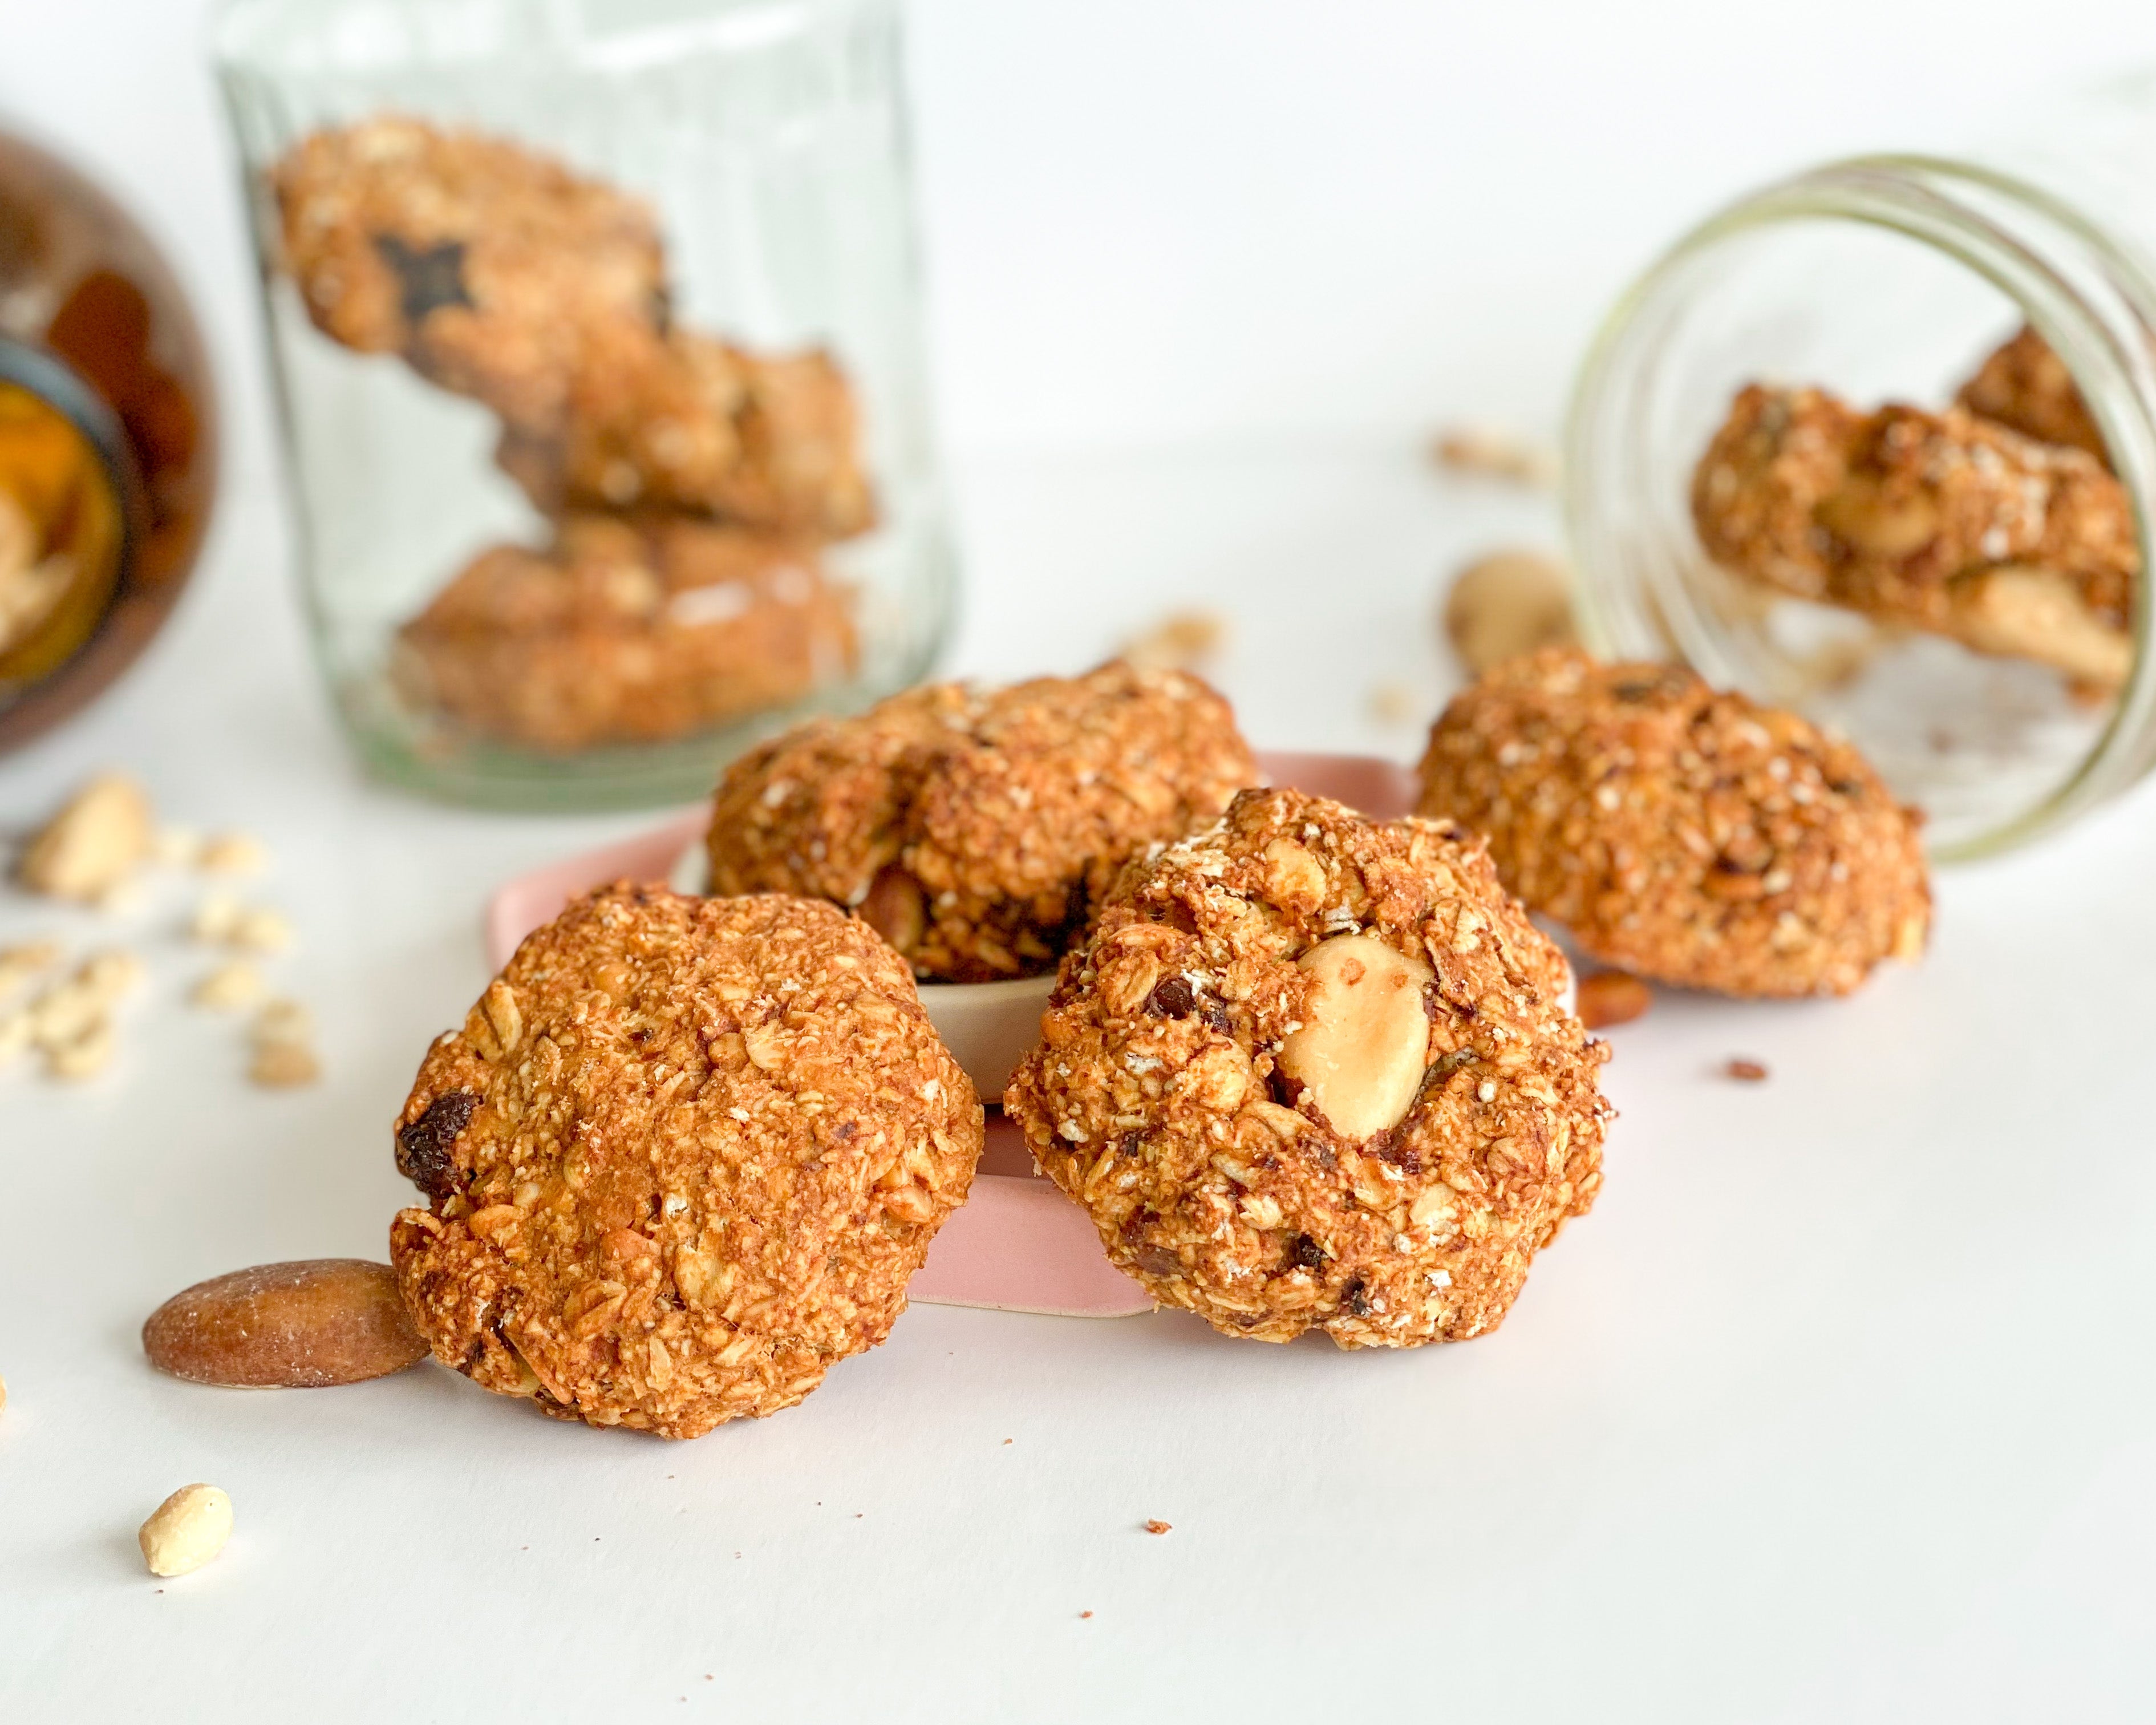 EASY OATMEAL PROTEIN COOKIES